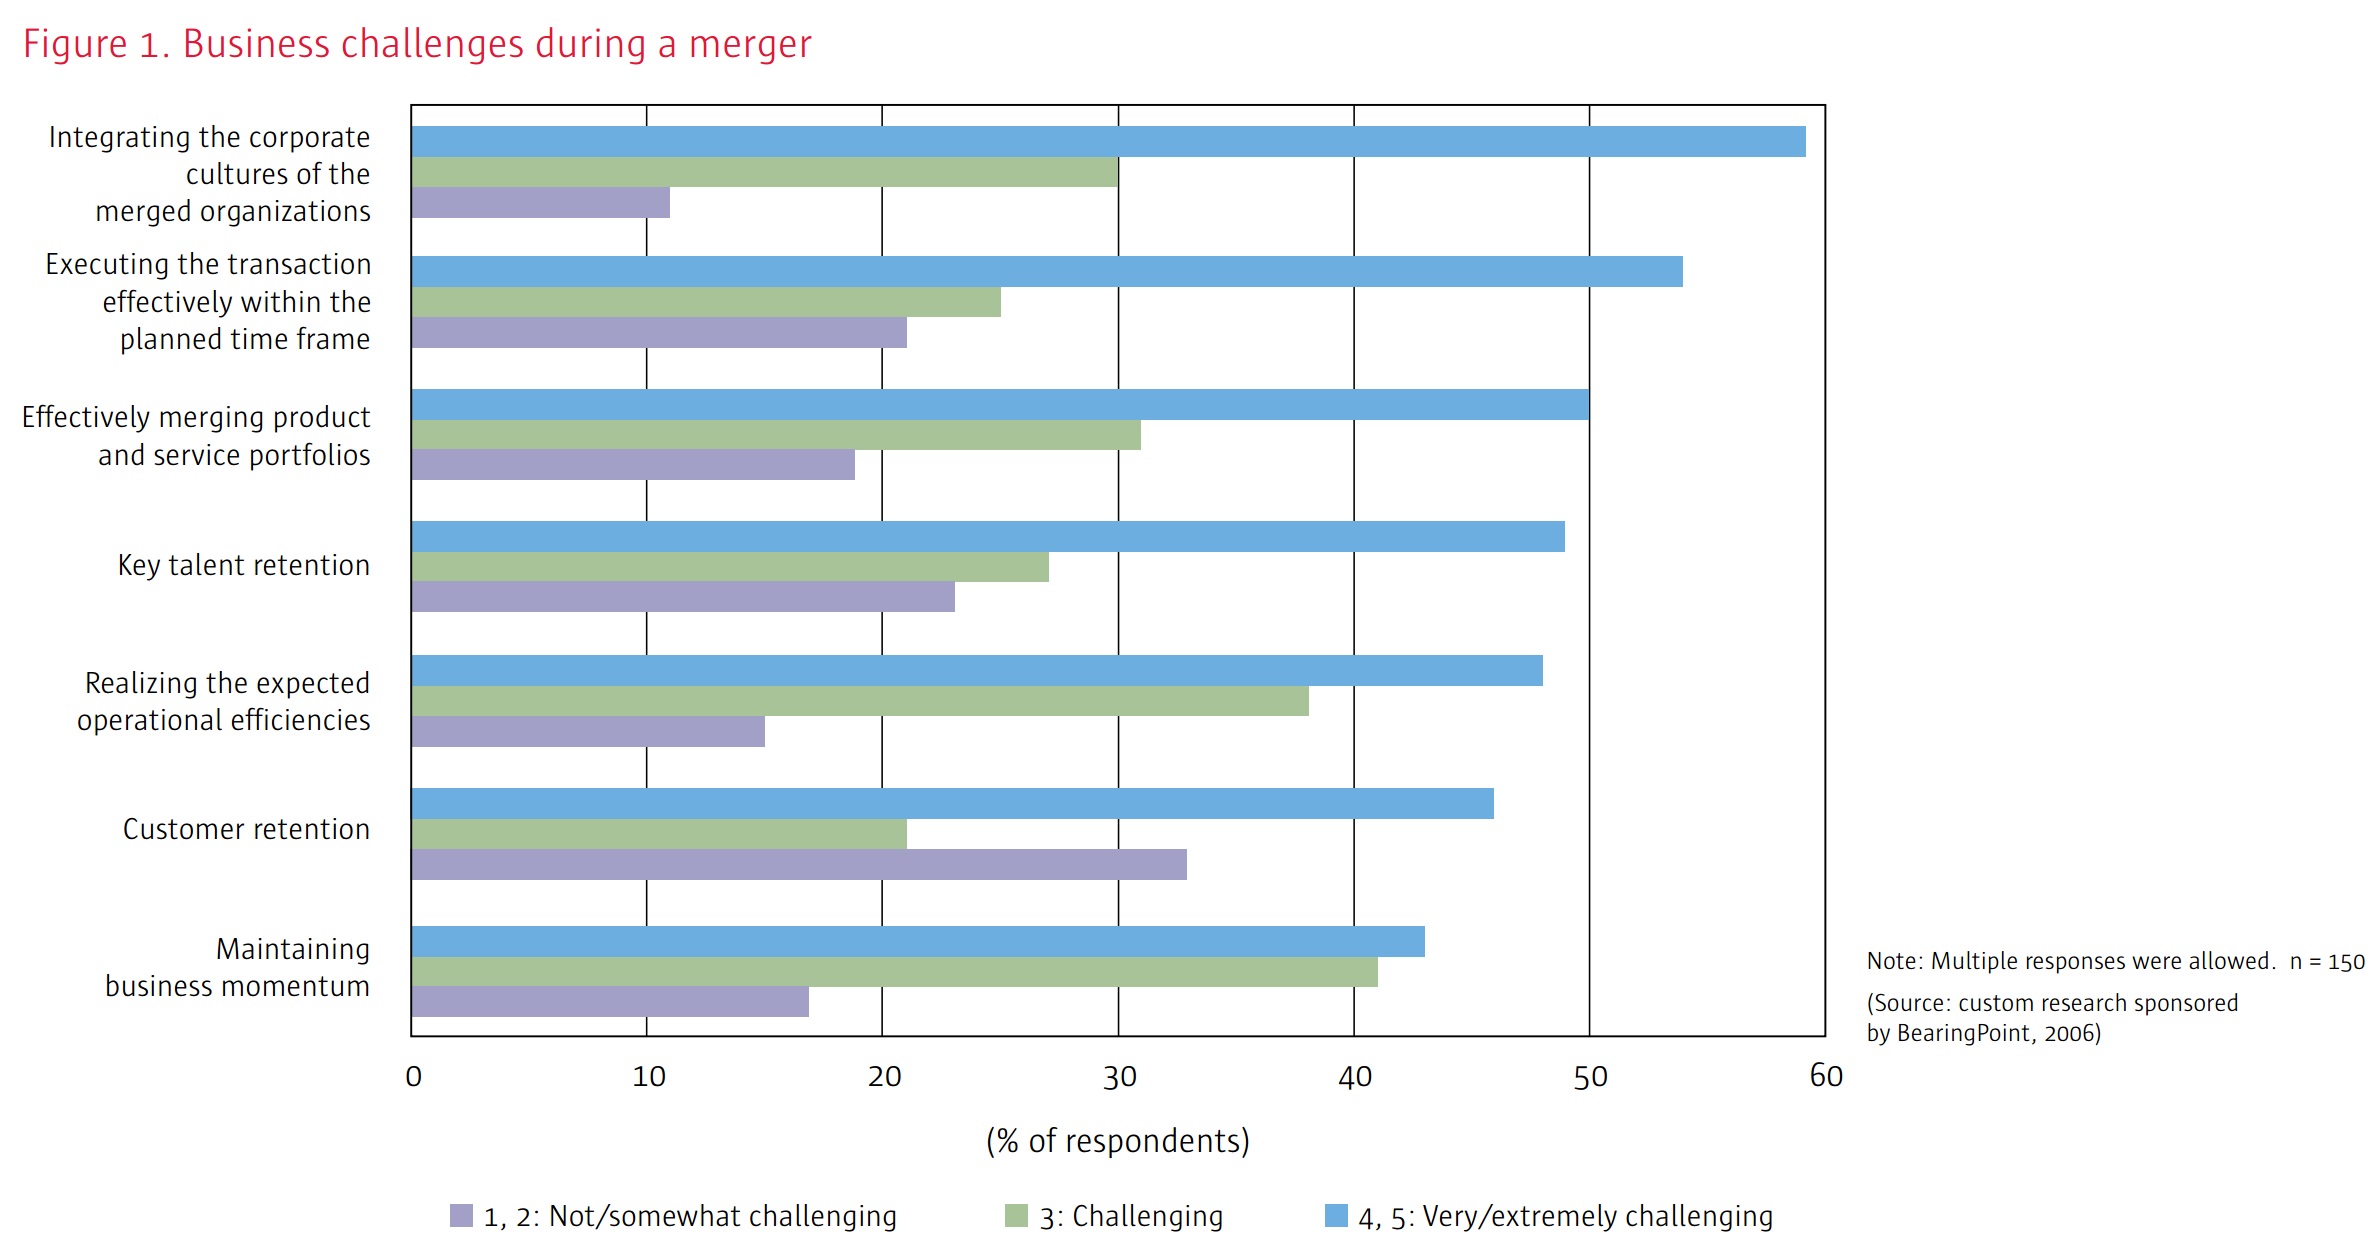 Figure 1. Business challenges during a merger